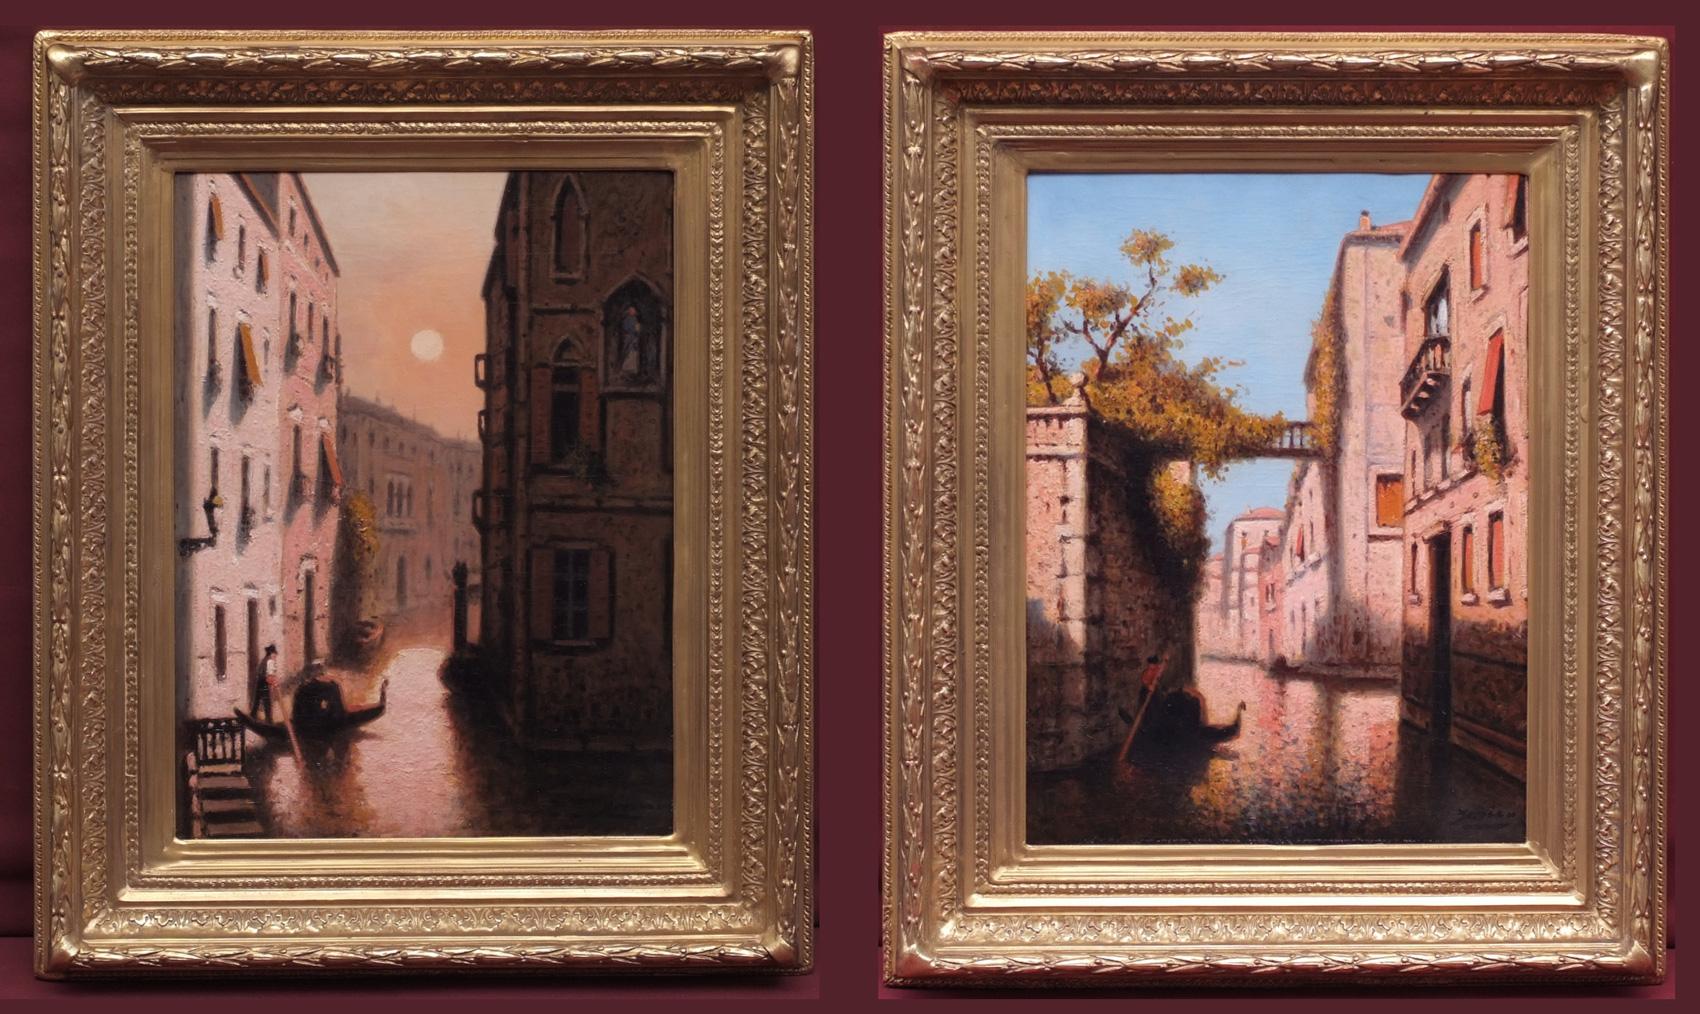 MIRO LLEO Gaspar  Landscape Painting - Paintings Early 20th century - Venice views in pair